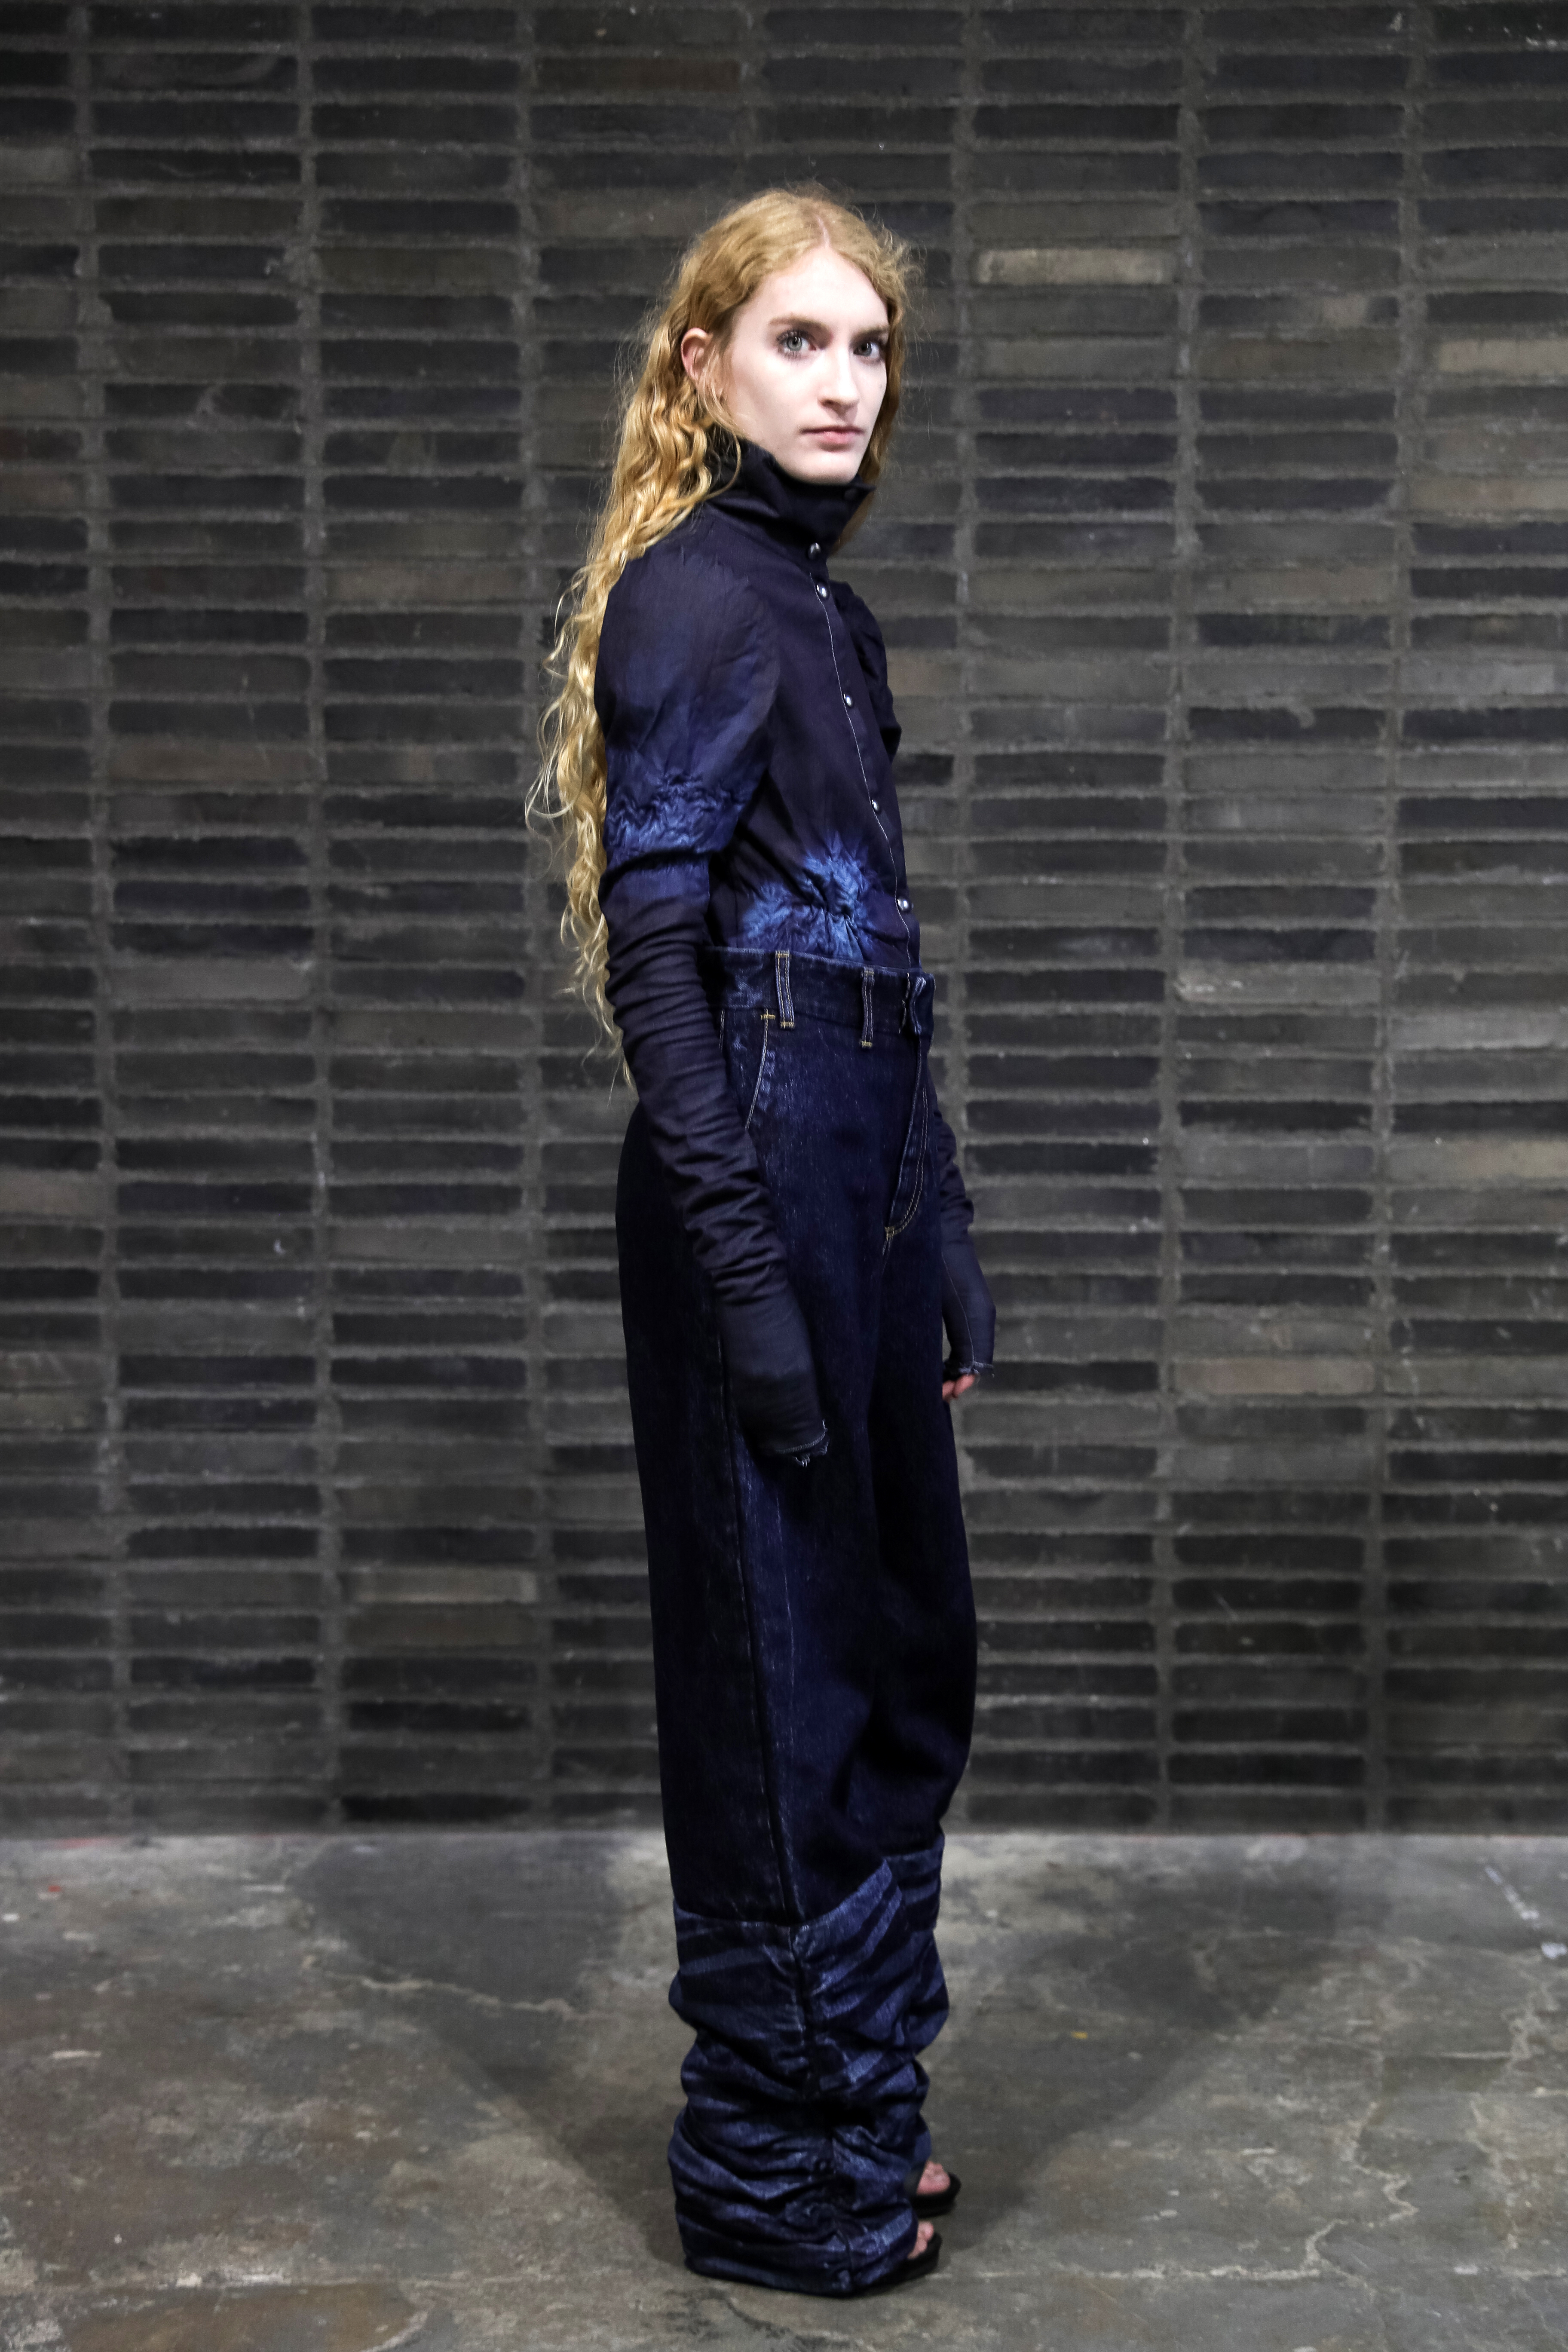 Francesca Girardelli from IED Milan - 